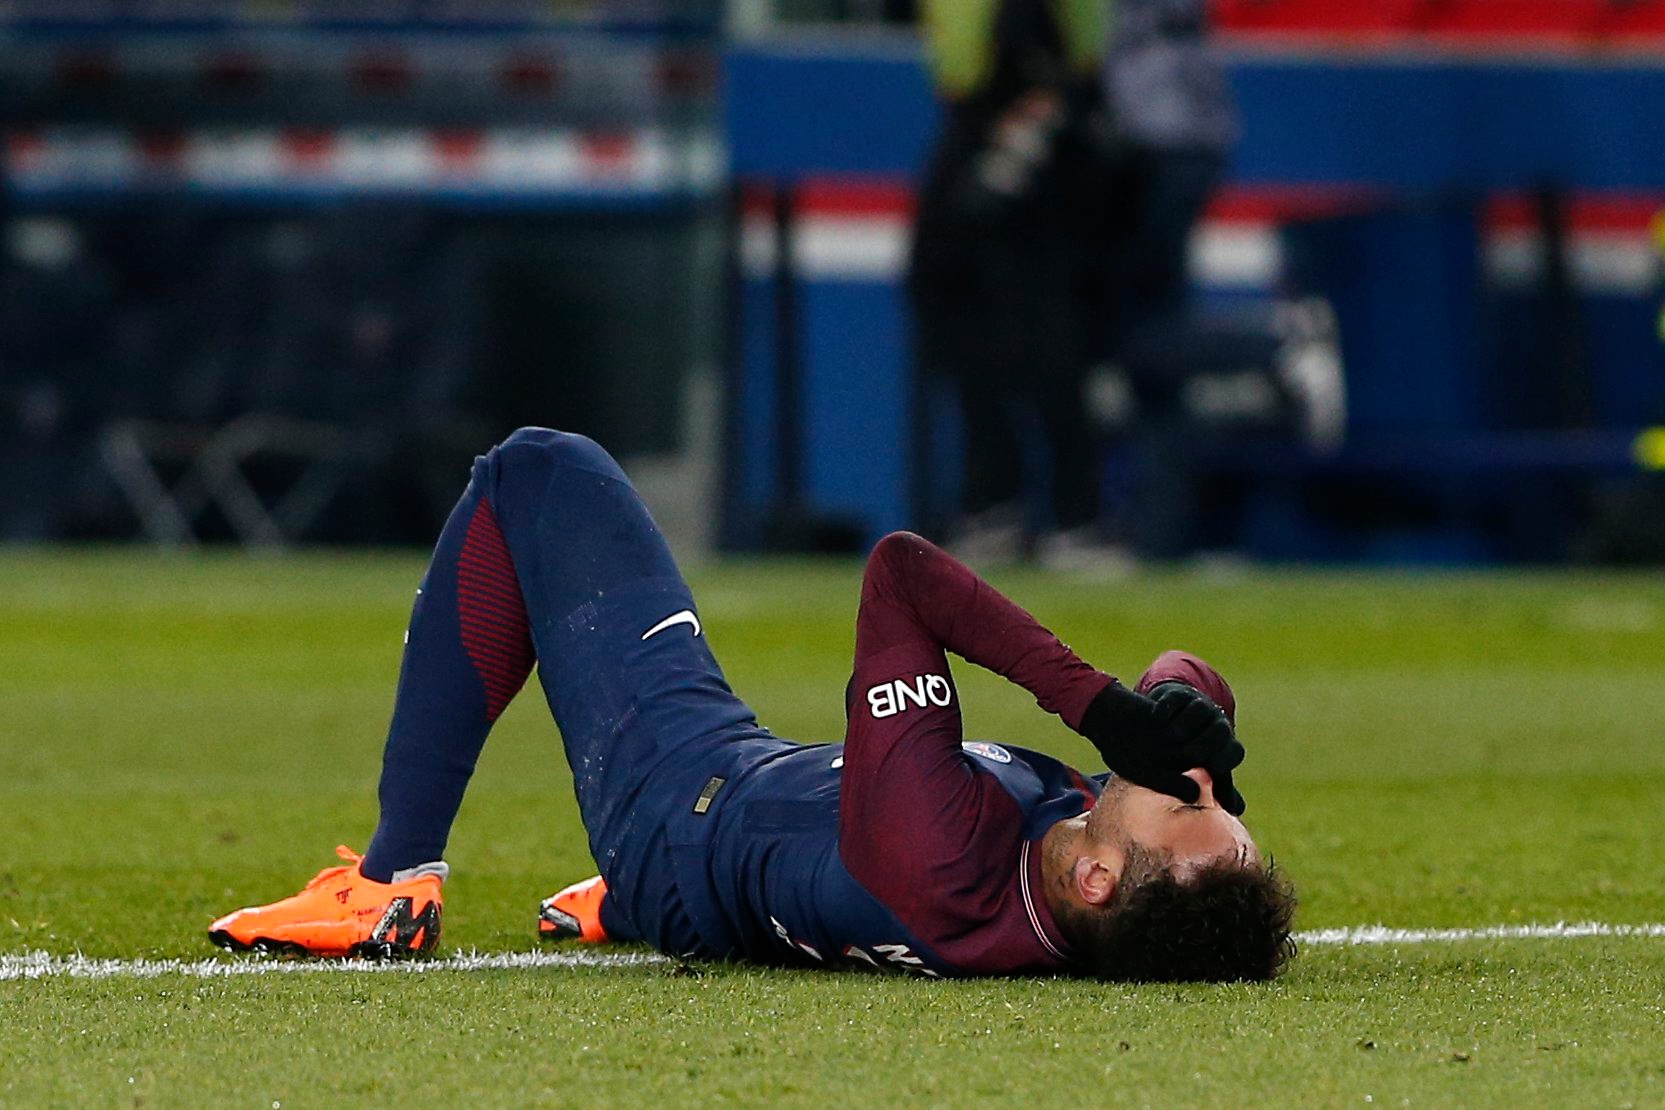 PSG's Neymar lays on the pitch after being fouled during the French League One soccer match between Paris Saint-Germain and Marseille at the Parc des Princes Stadium, in Paris, France, Sunday, Feb. 25, 2018. (AP Photo/Thibault Camus) FRANCE SOCCER LEAGUE ONE